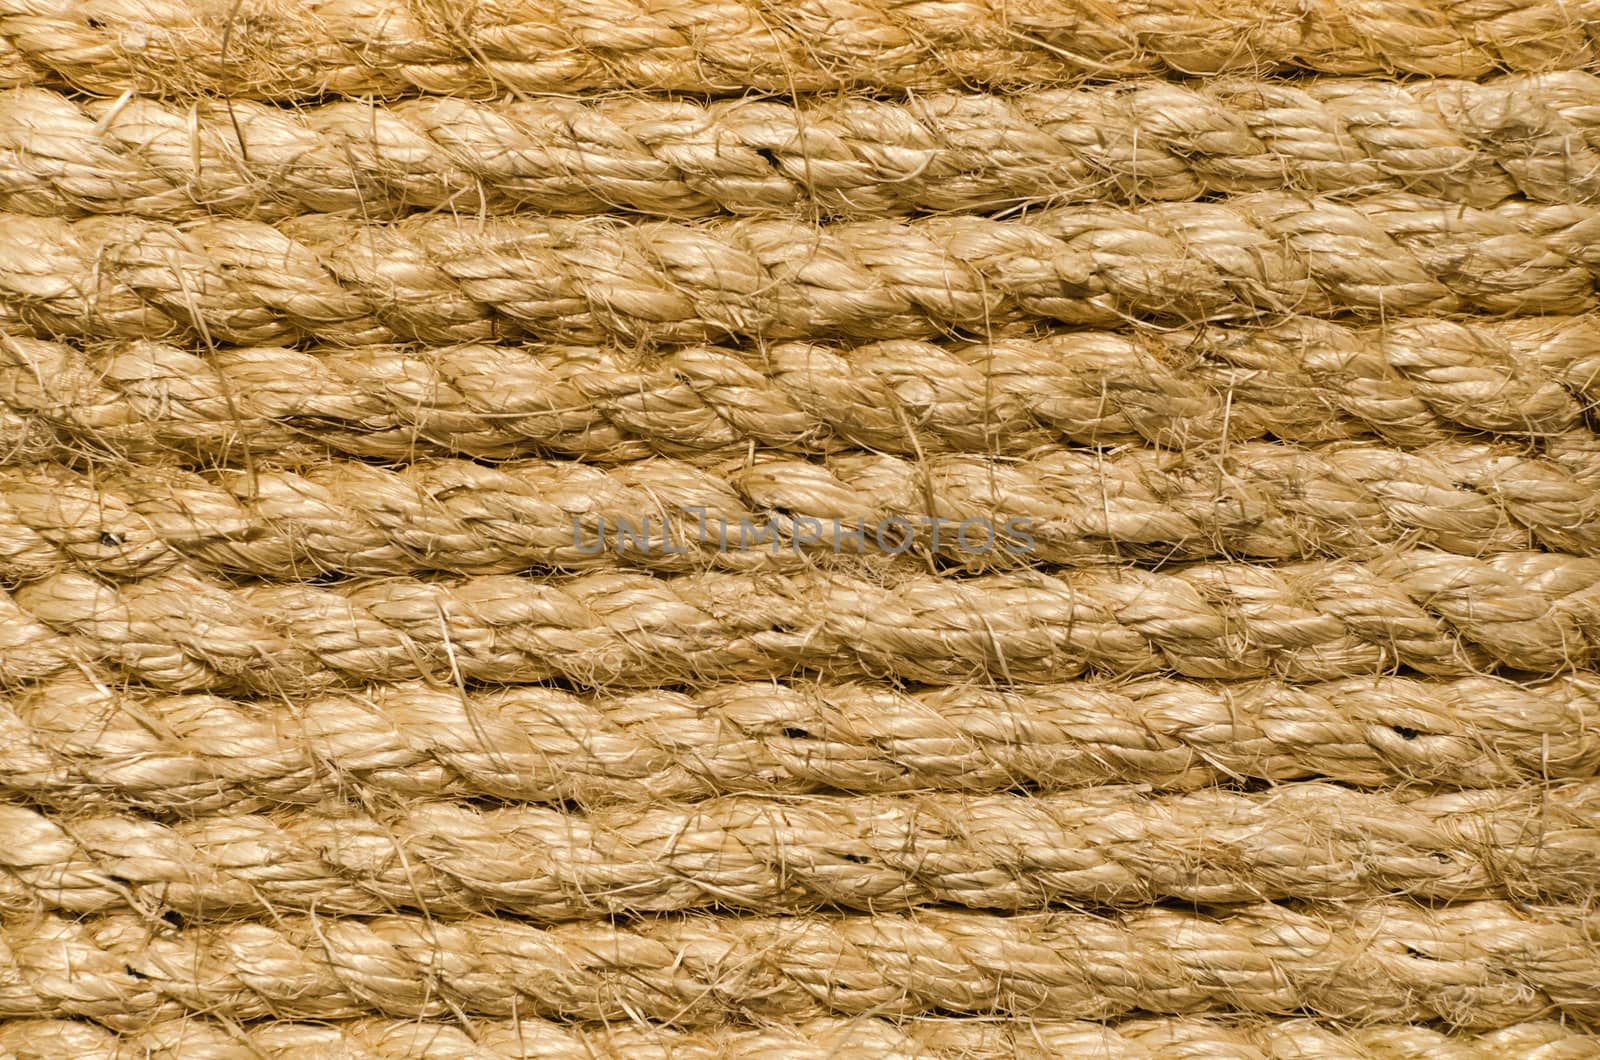 Rough rope background.